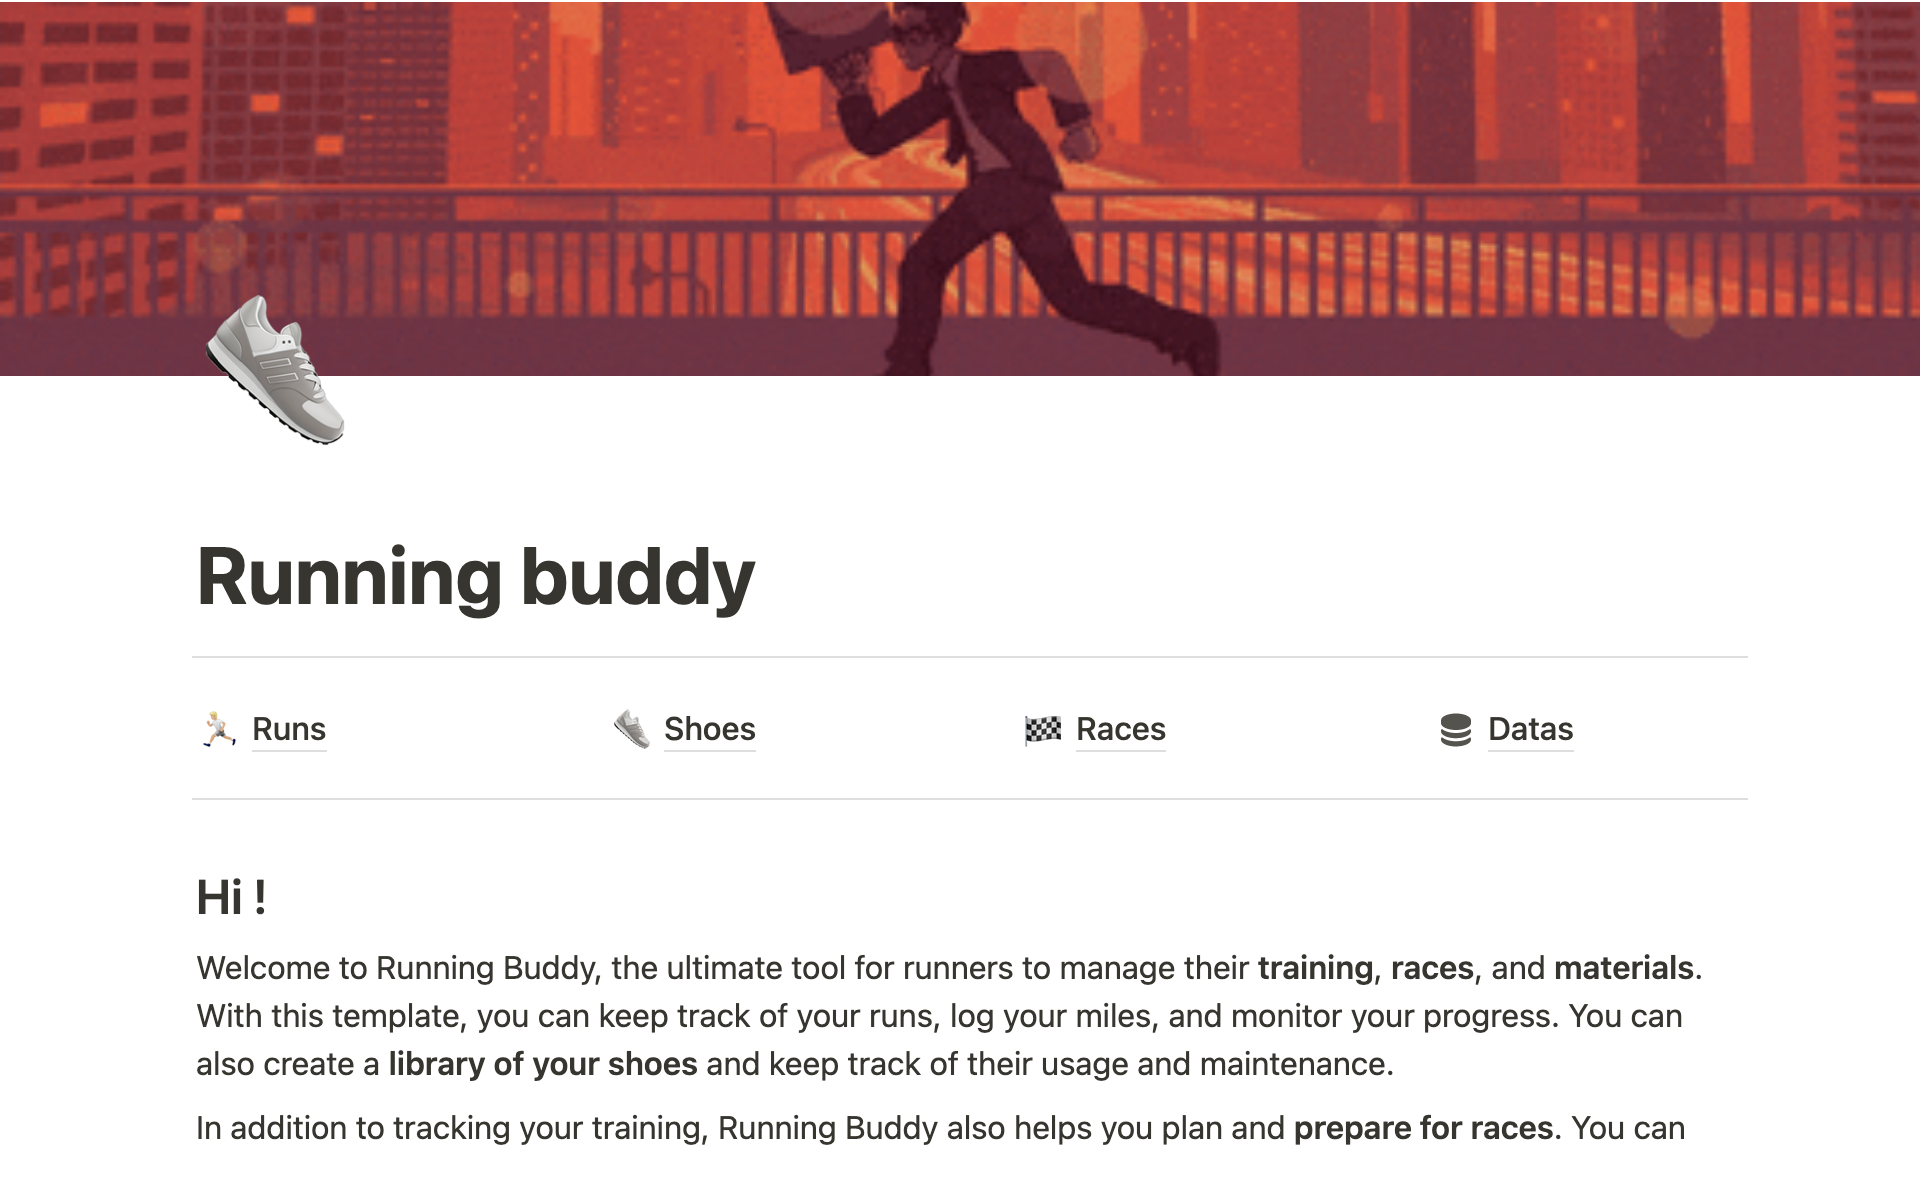 Running Buddy is a comprehensive notion template for runners to manage their training, races, shoes, bibs, medals, and progress.